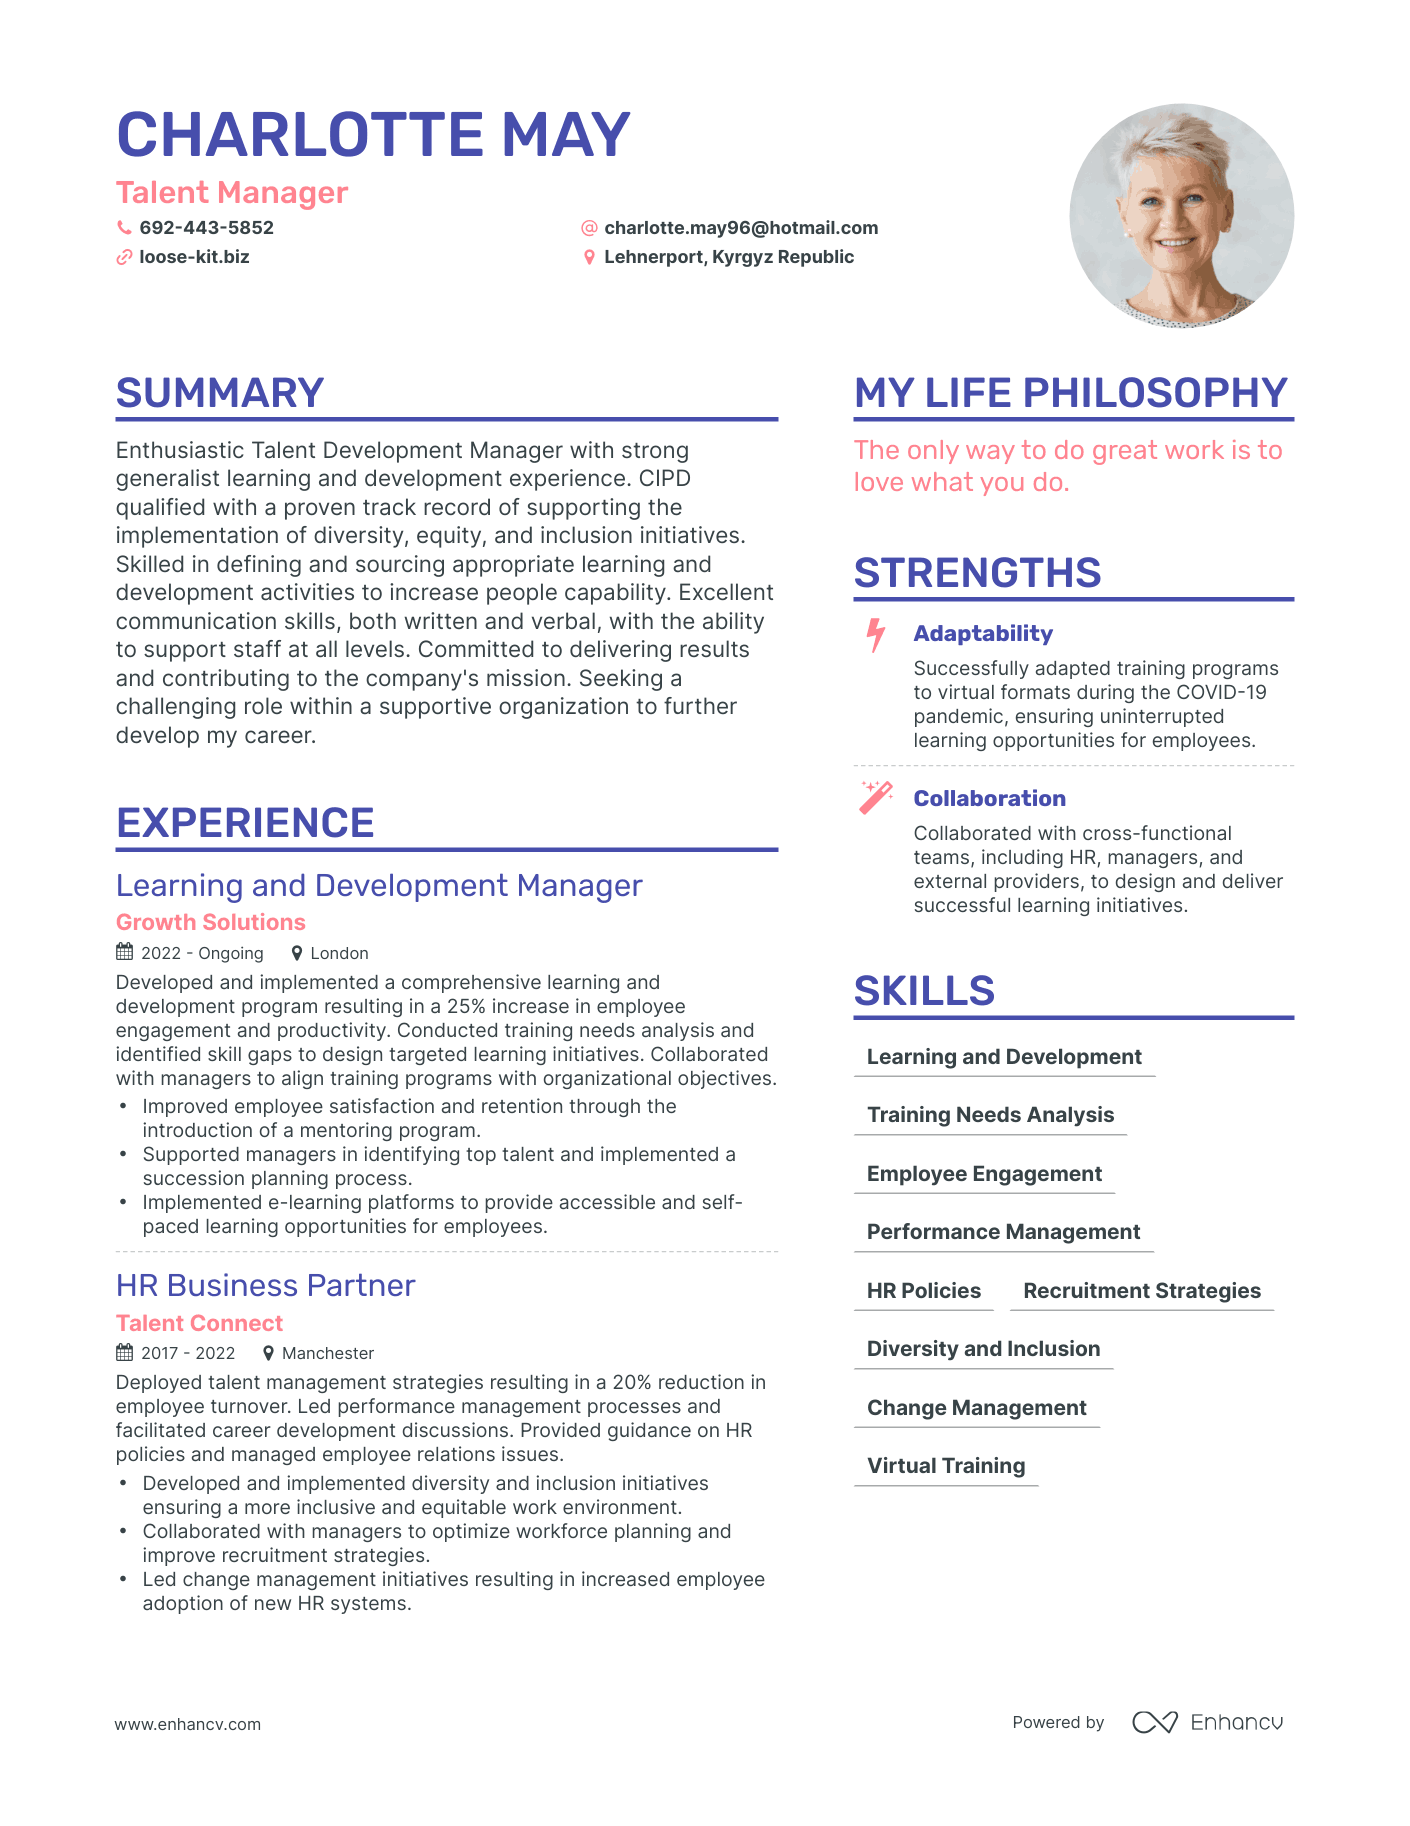 Talent Manager resume example